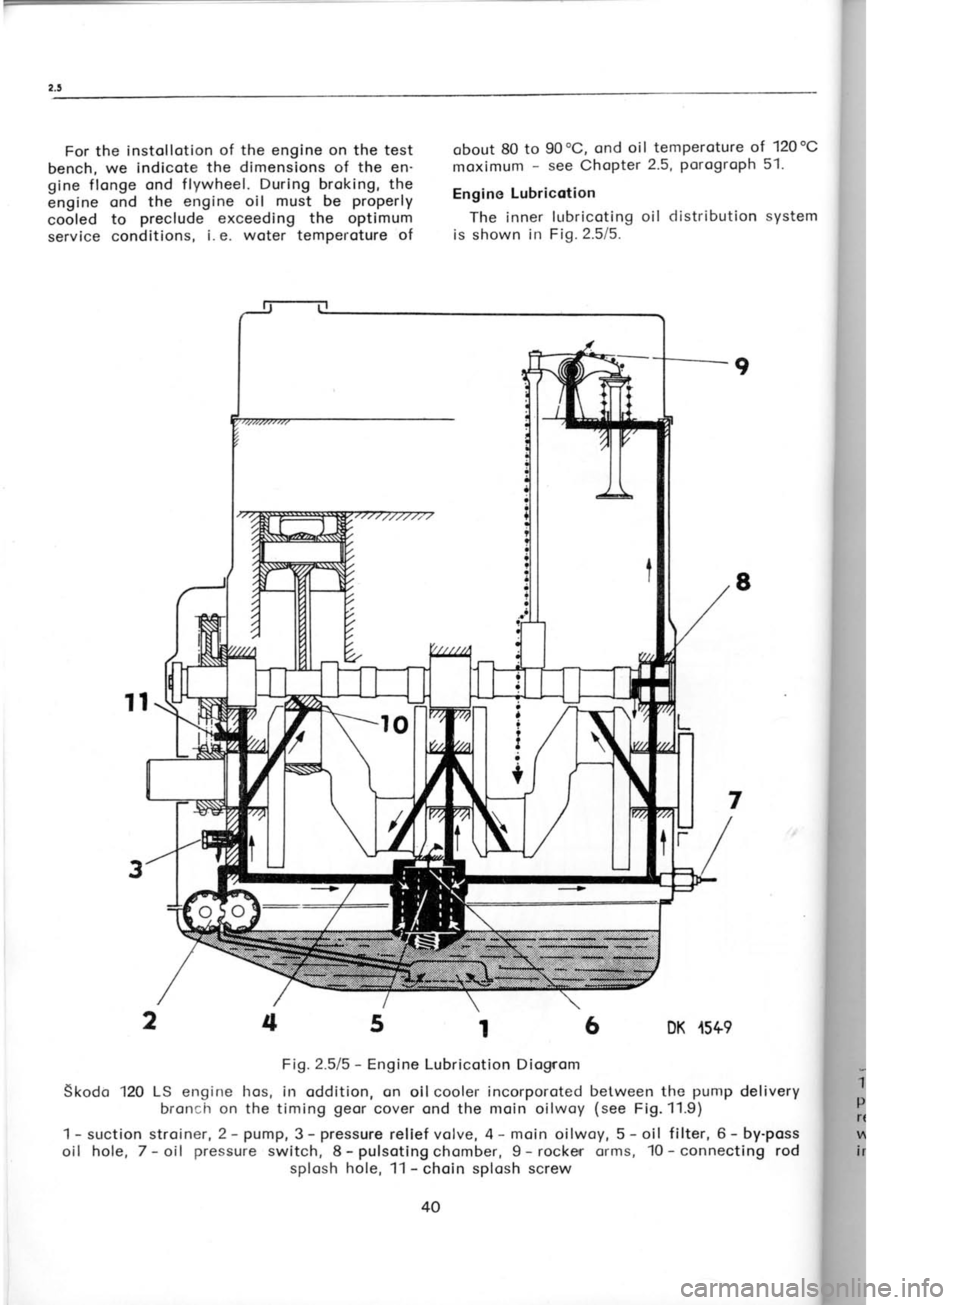 SKODA 120 LSE 1980 Owners Guide For the 
instol lotion  of the engine on the test
bench,  we indicote  the dimensions 
of the en
gine flonge  ond flywheel.  During broking,  the
engine  qnd 
the engine oil  must 
be properly
cooled